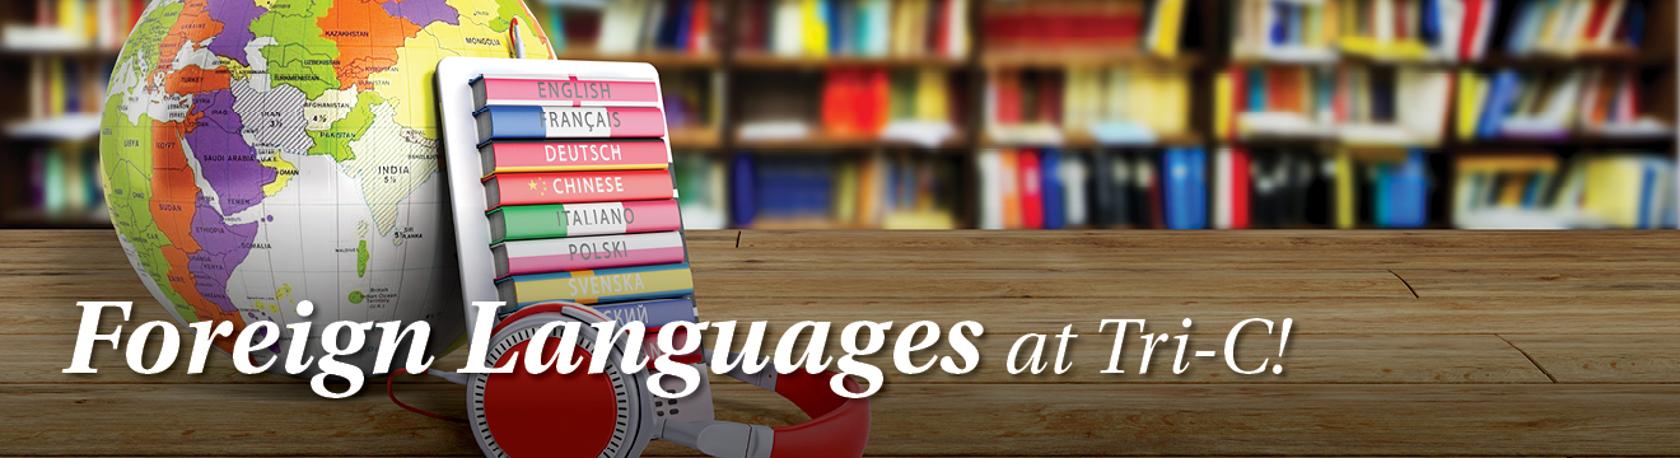 "Foreign Languages at Tri-C!" with image of globe and language textbooks.